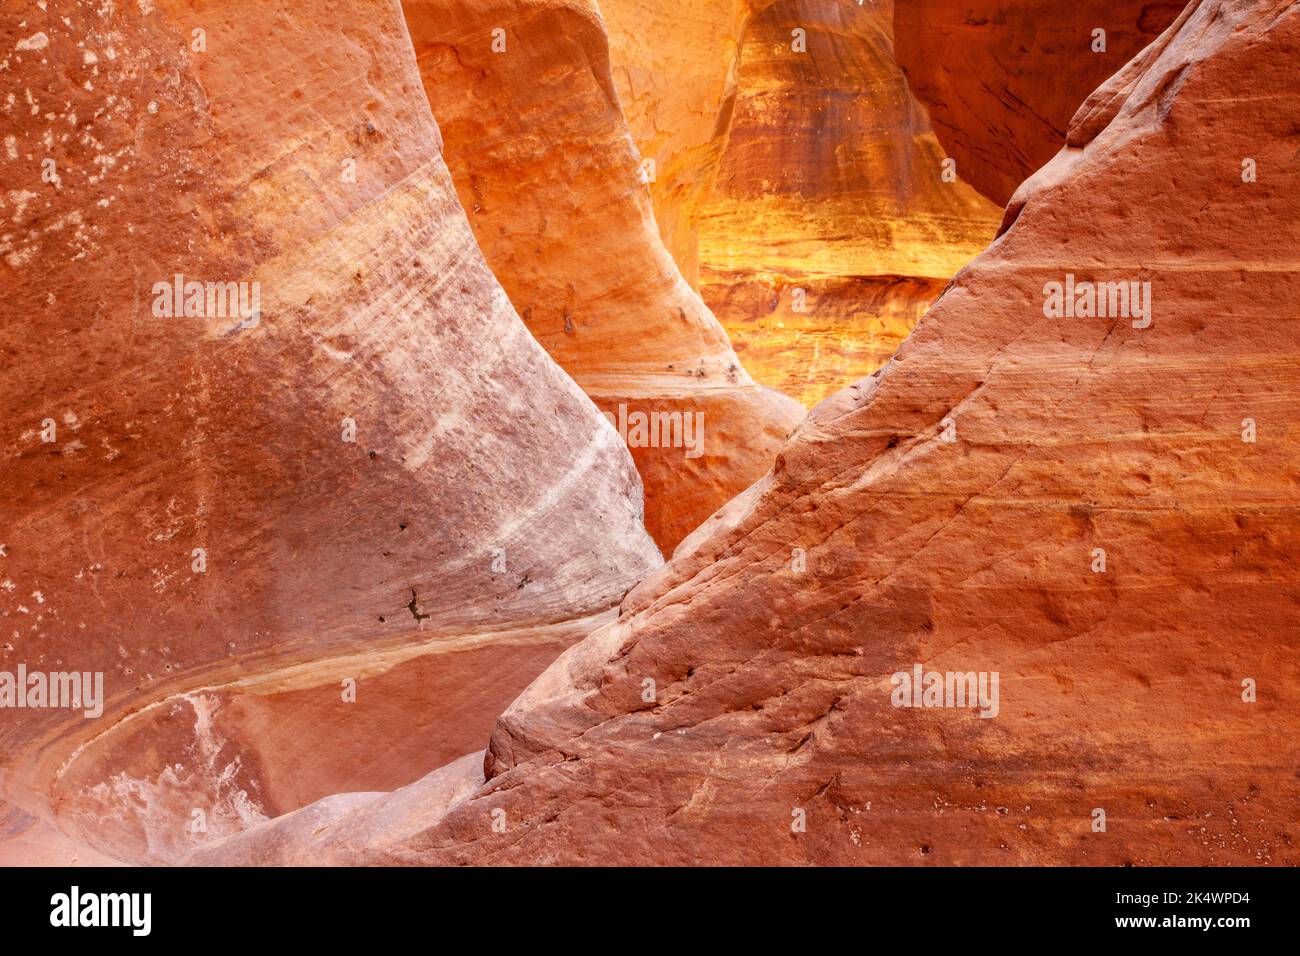 Curving walls of Holeman Slot canyon carved by rushing water over thousands of years in Canyonlands National Park, Utah. Stock Photo